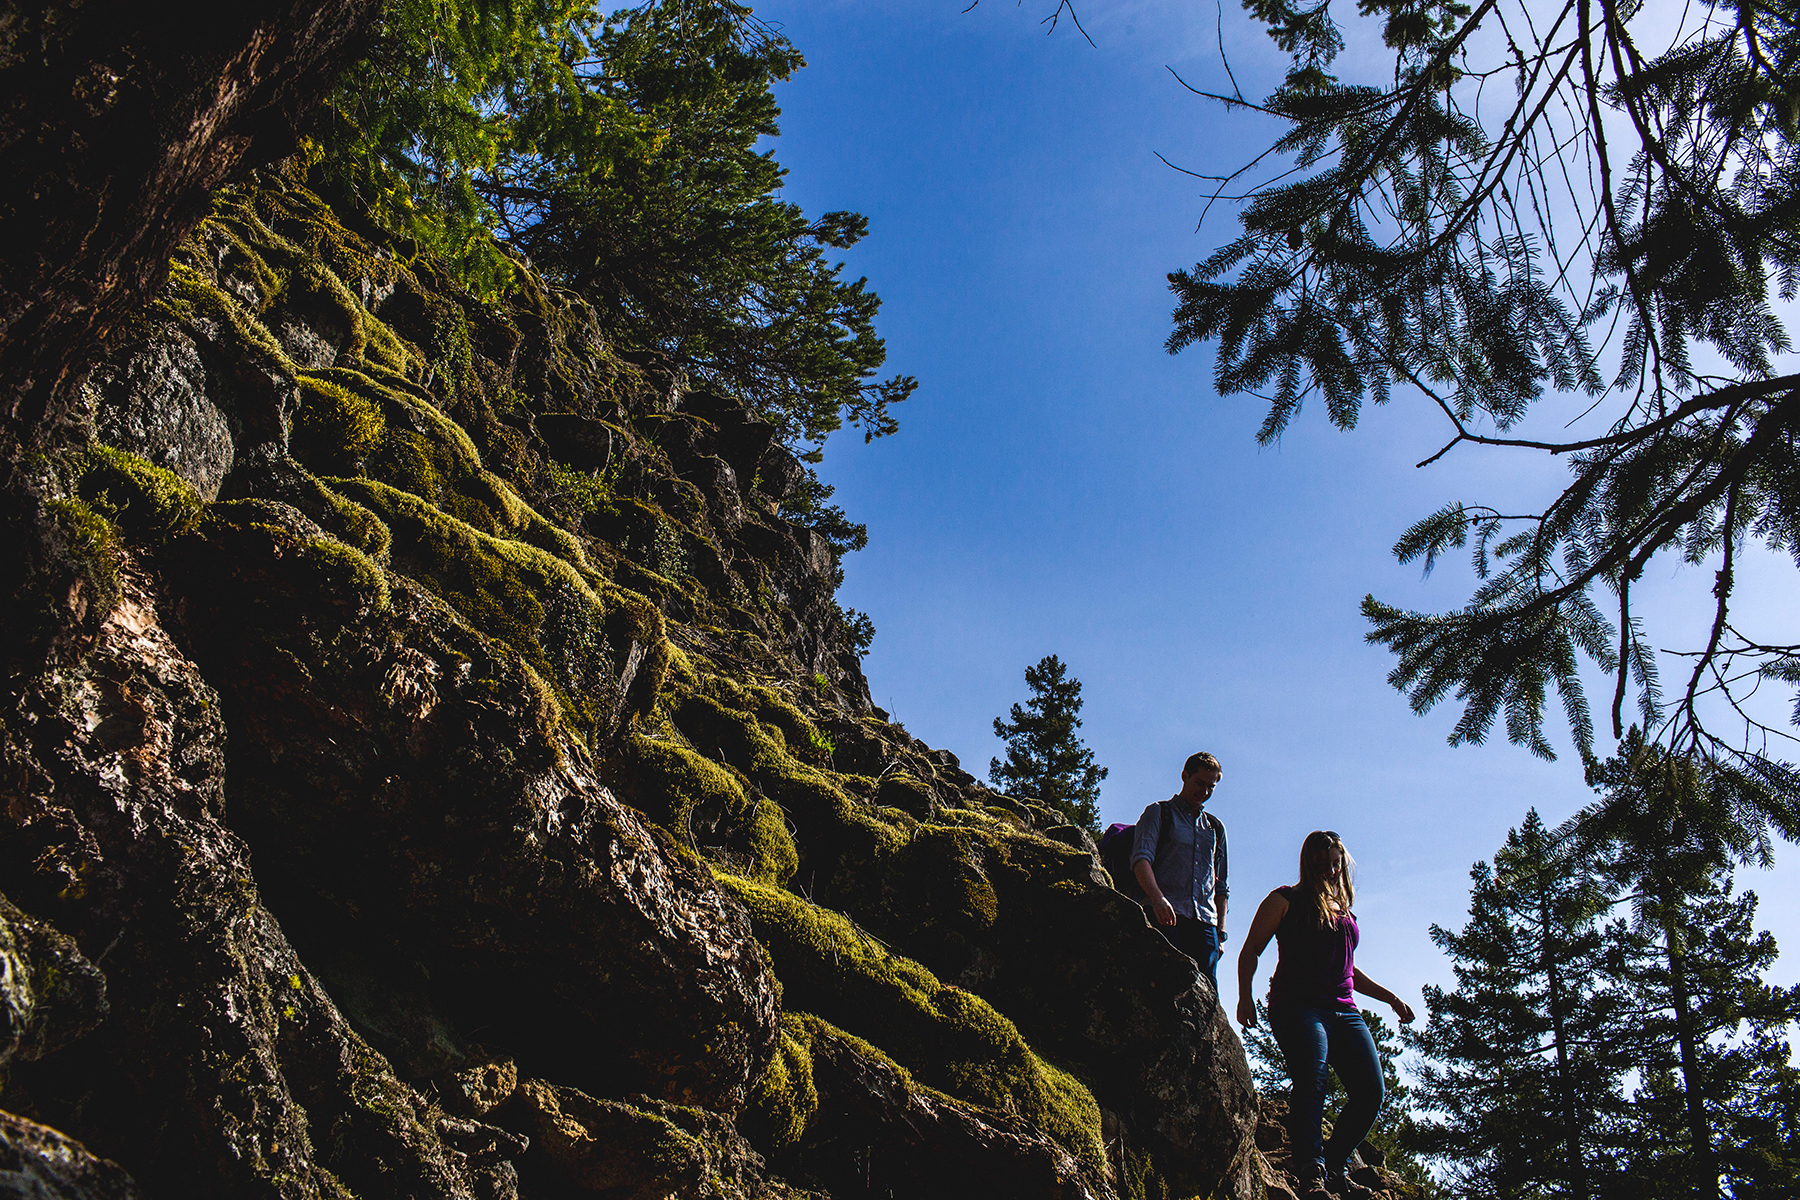 hiking engagement session in the pacific northwest